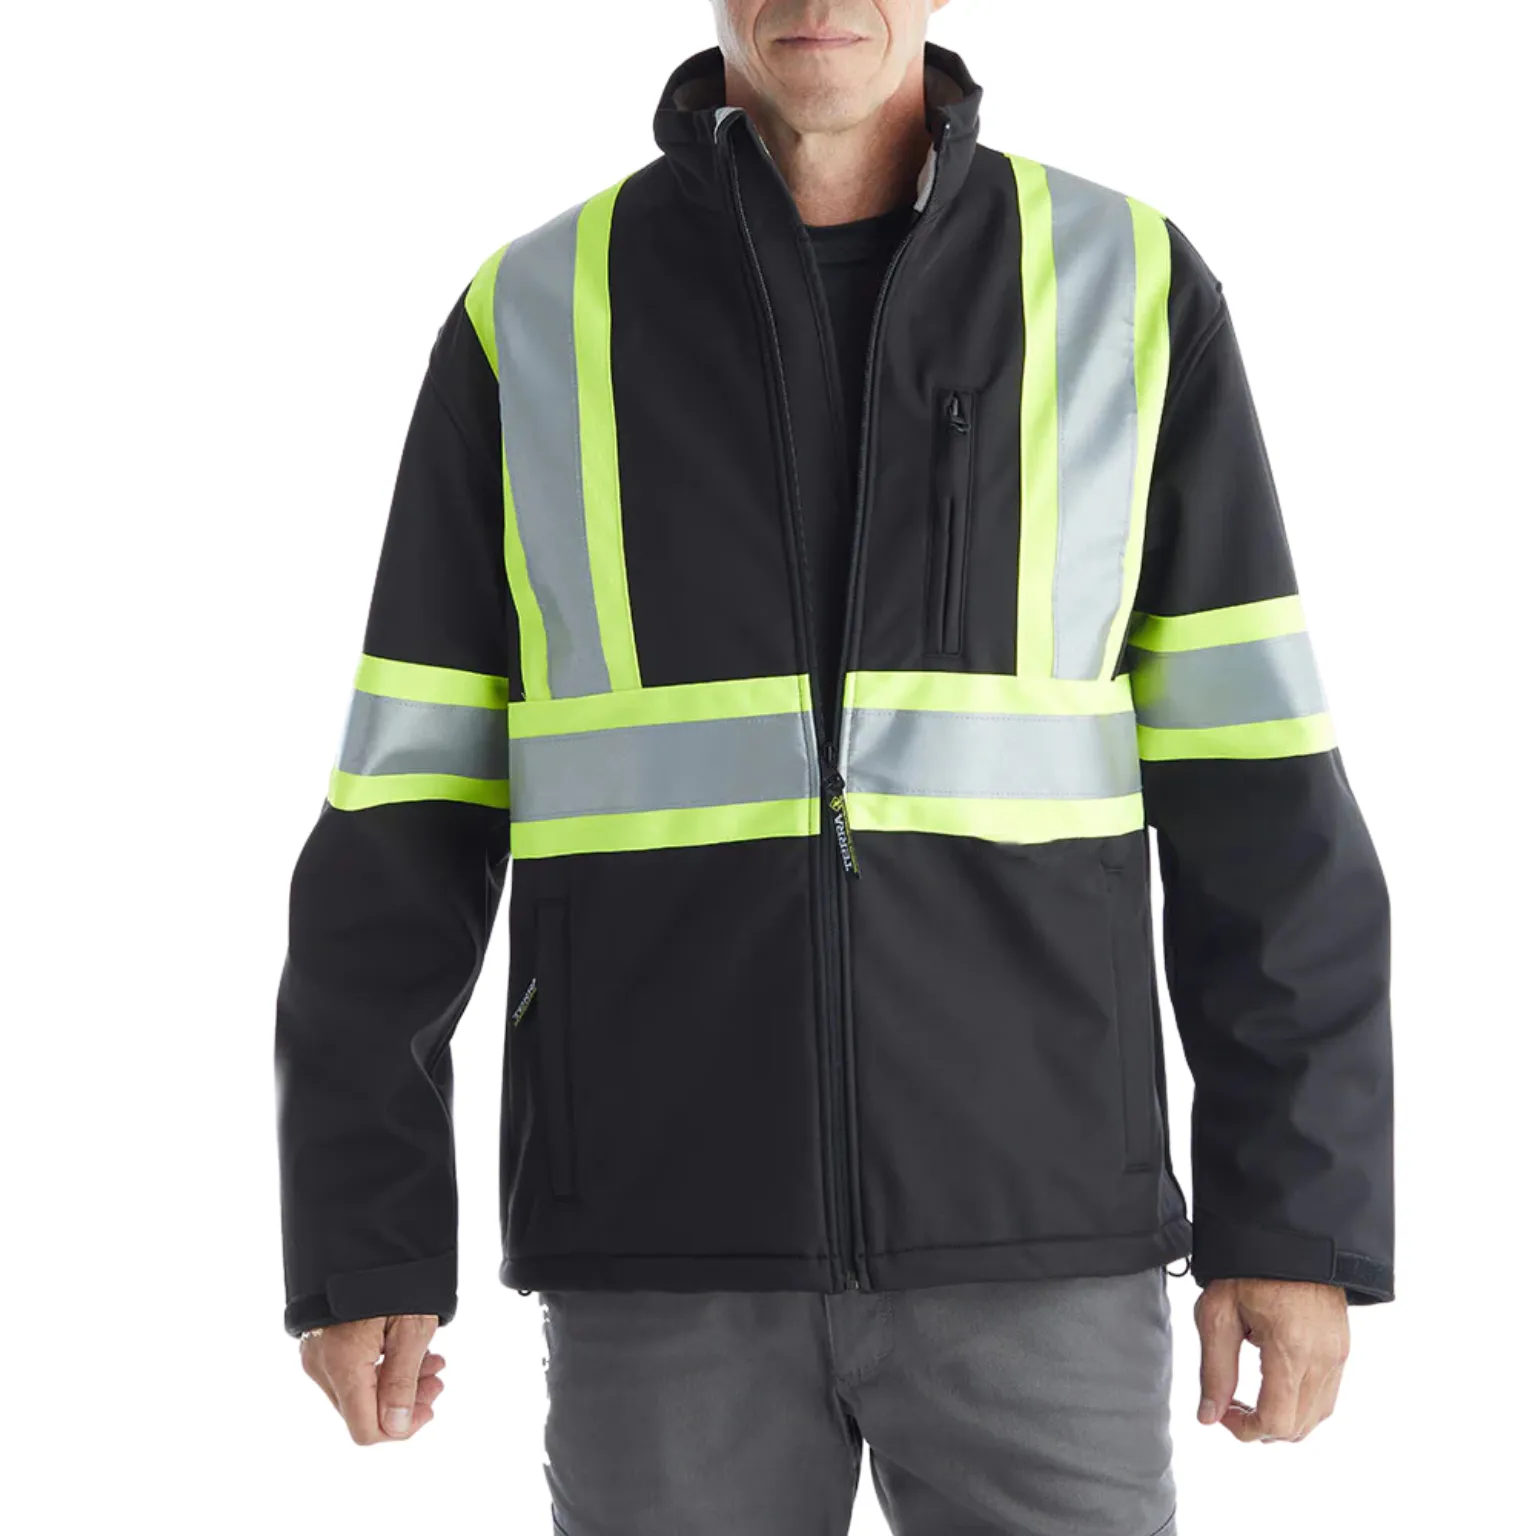 Safety Jacket manufacturing with trendy design